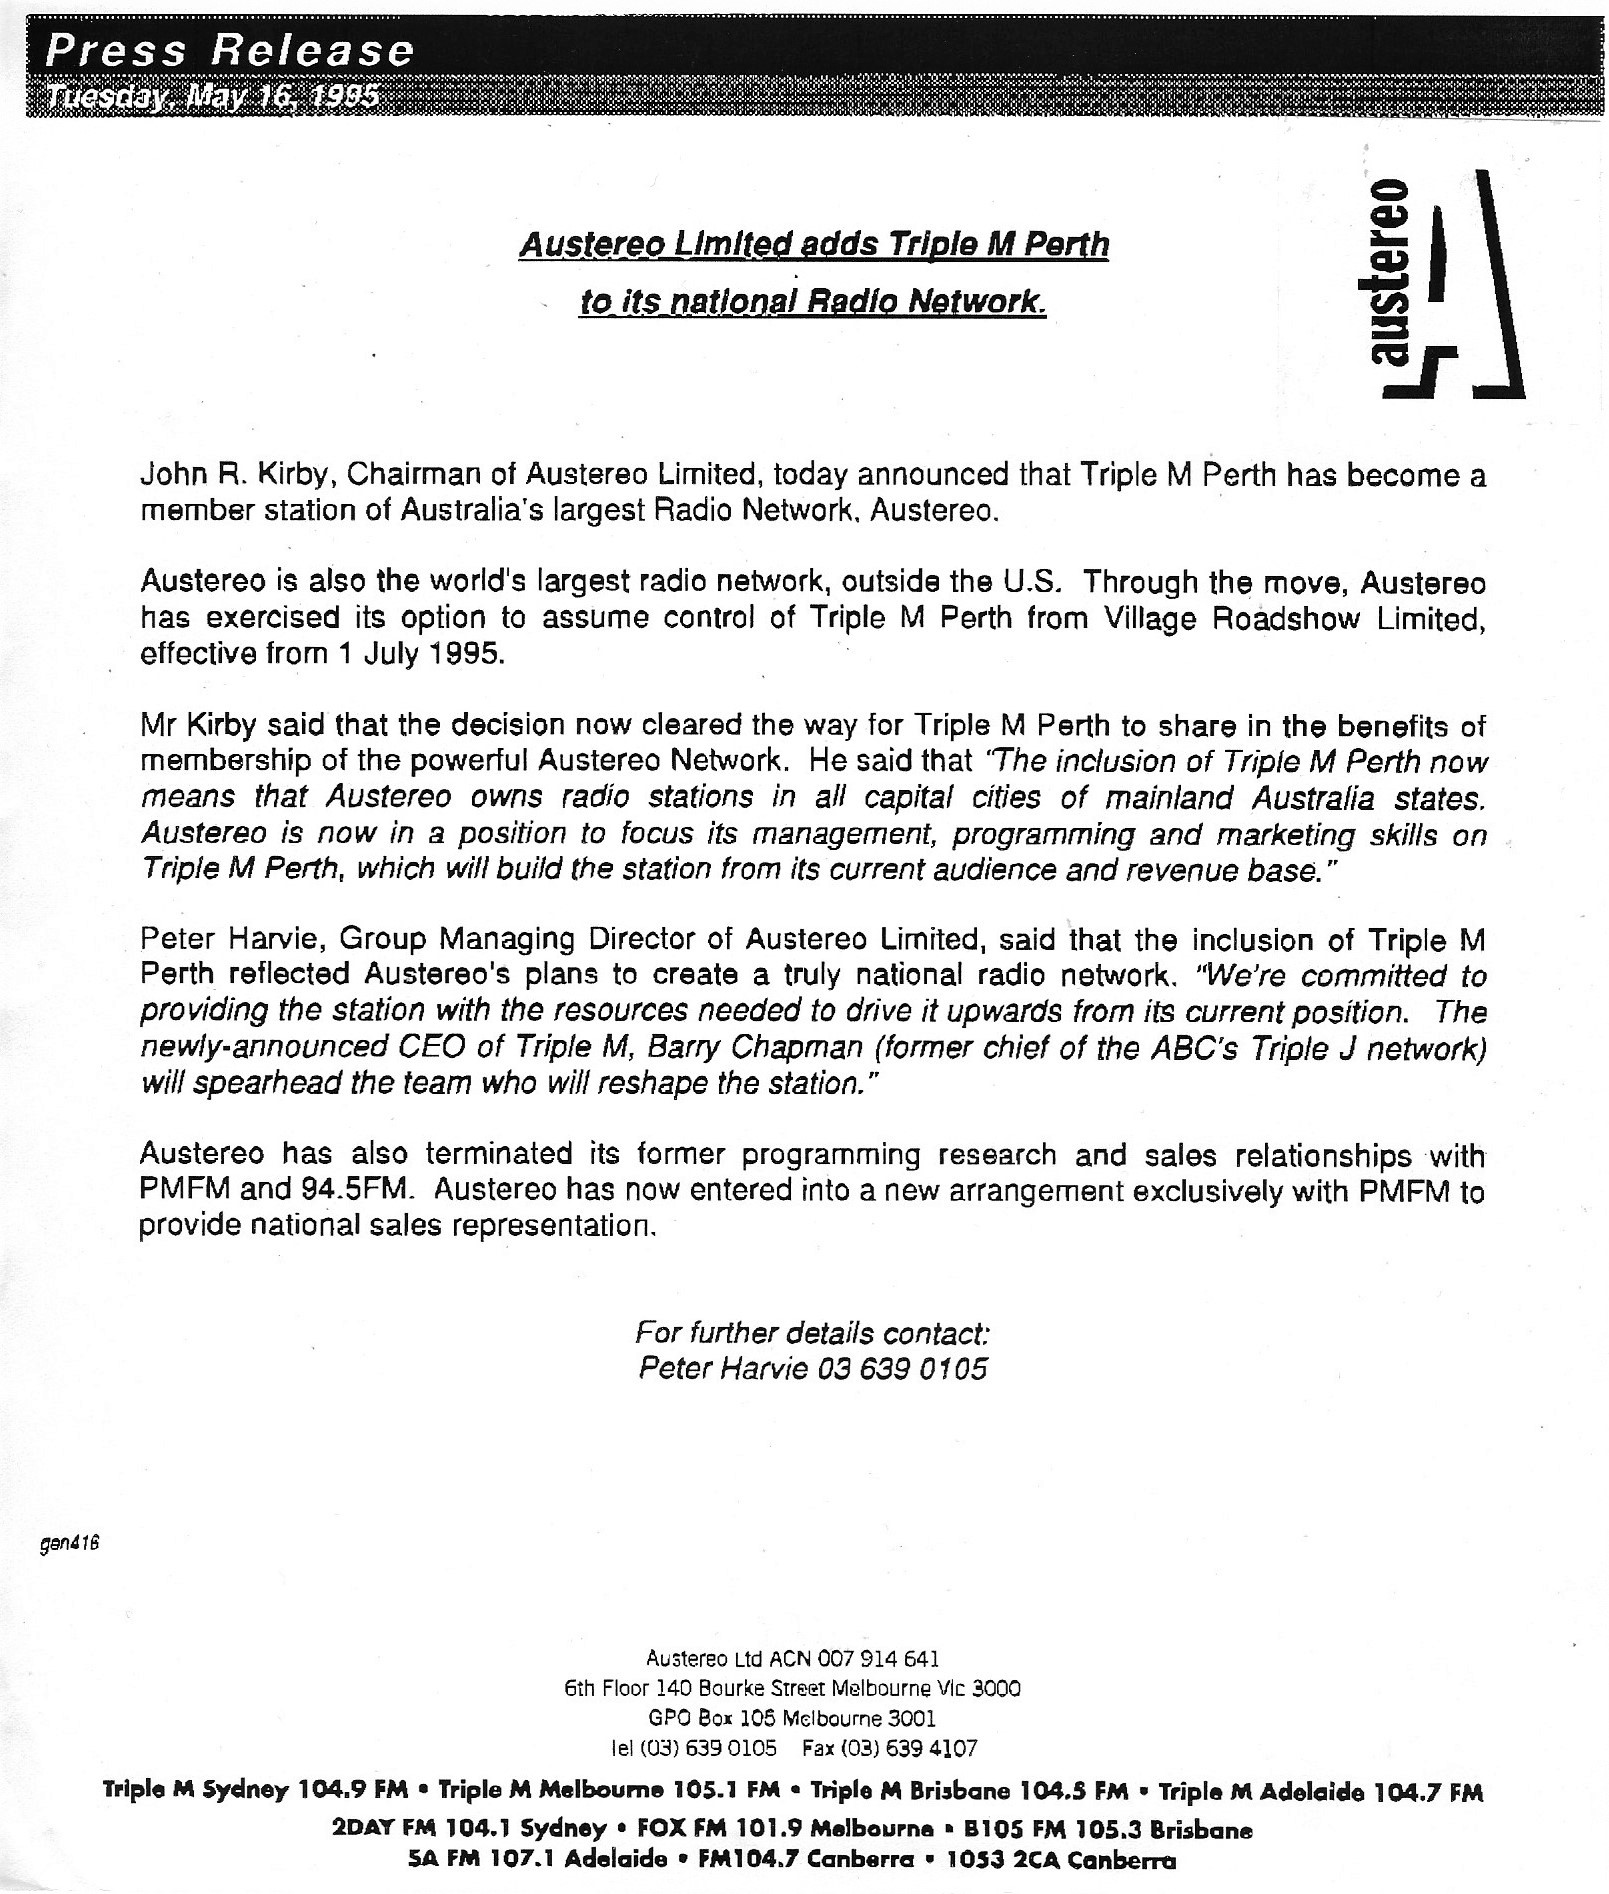 1995.05.16 - Article - Austereo adds Triple M Perth to its national network.jpeg